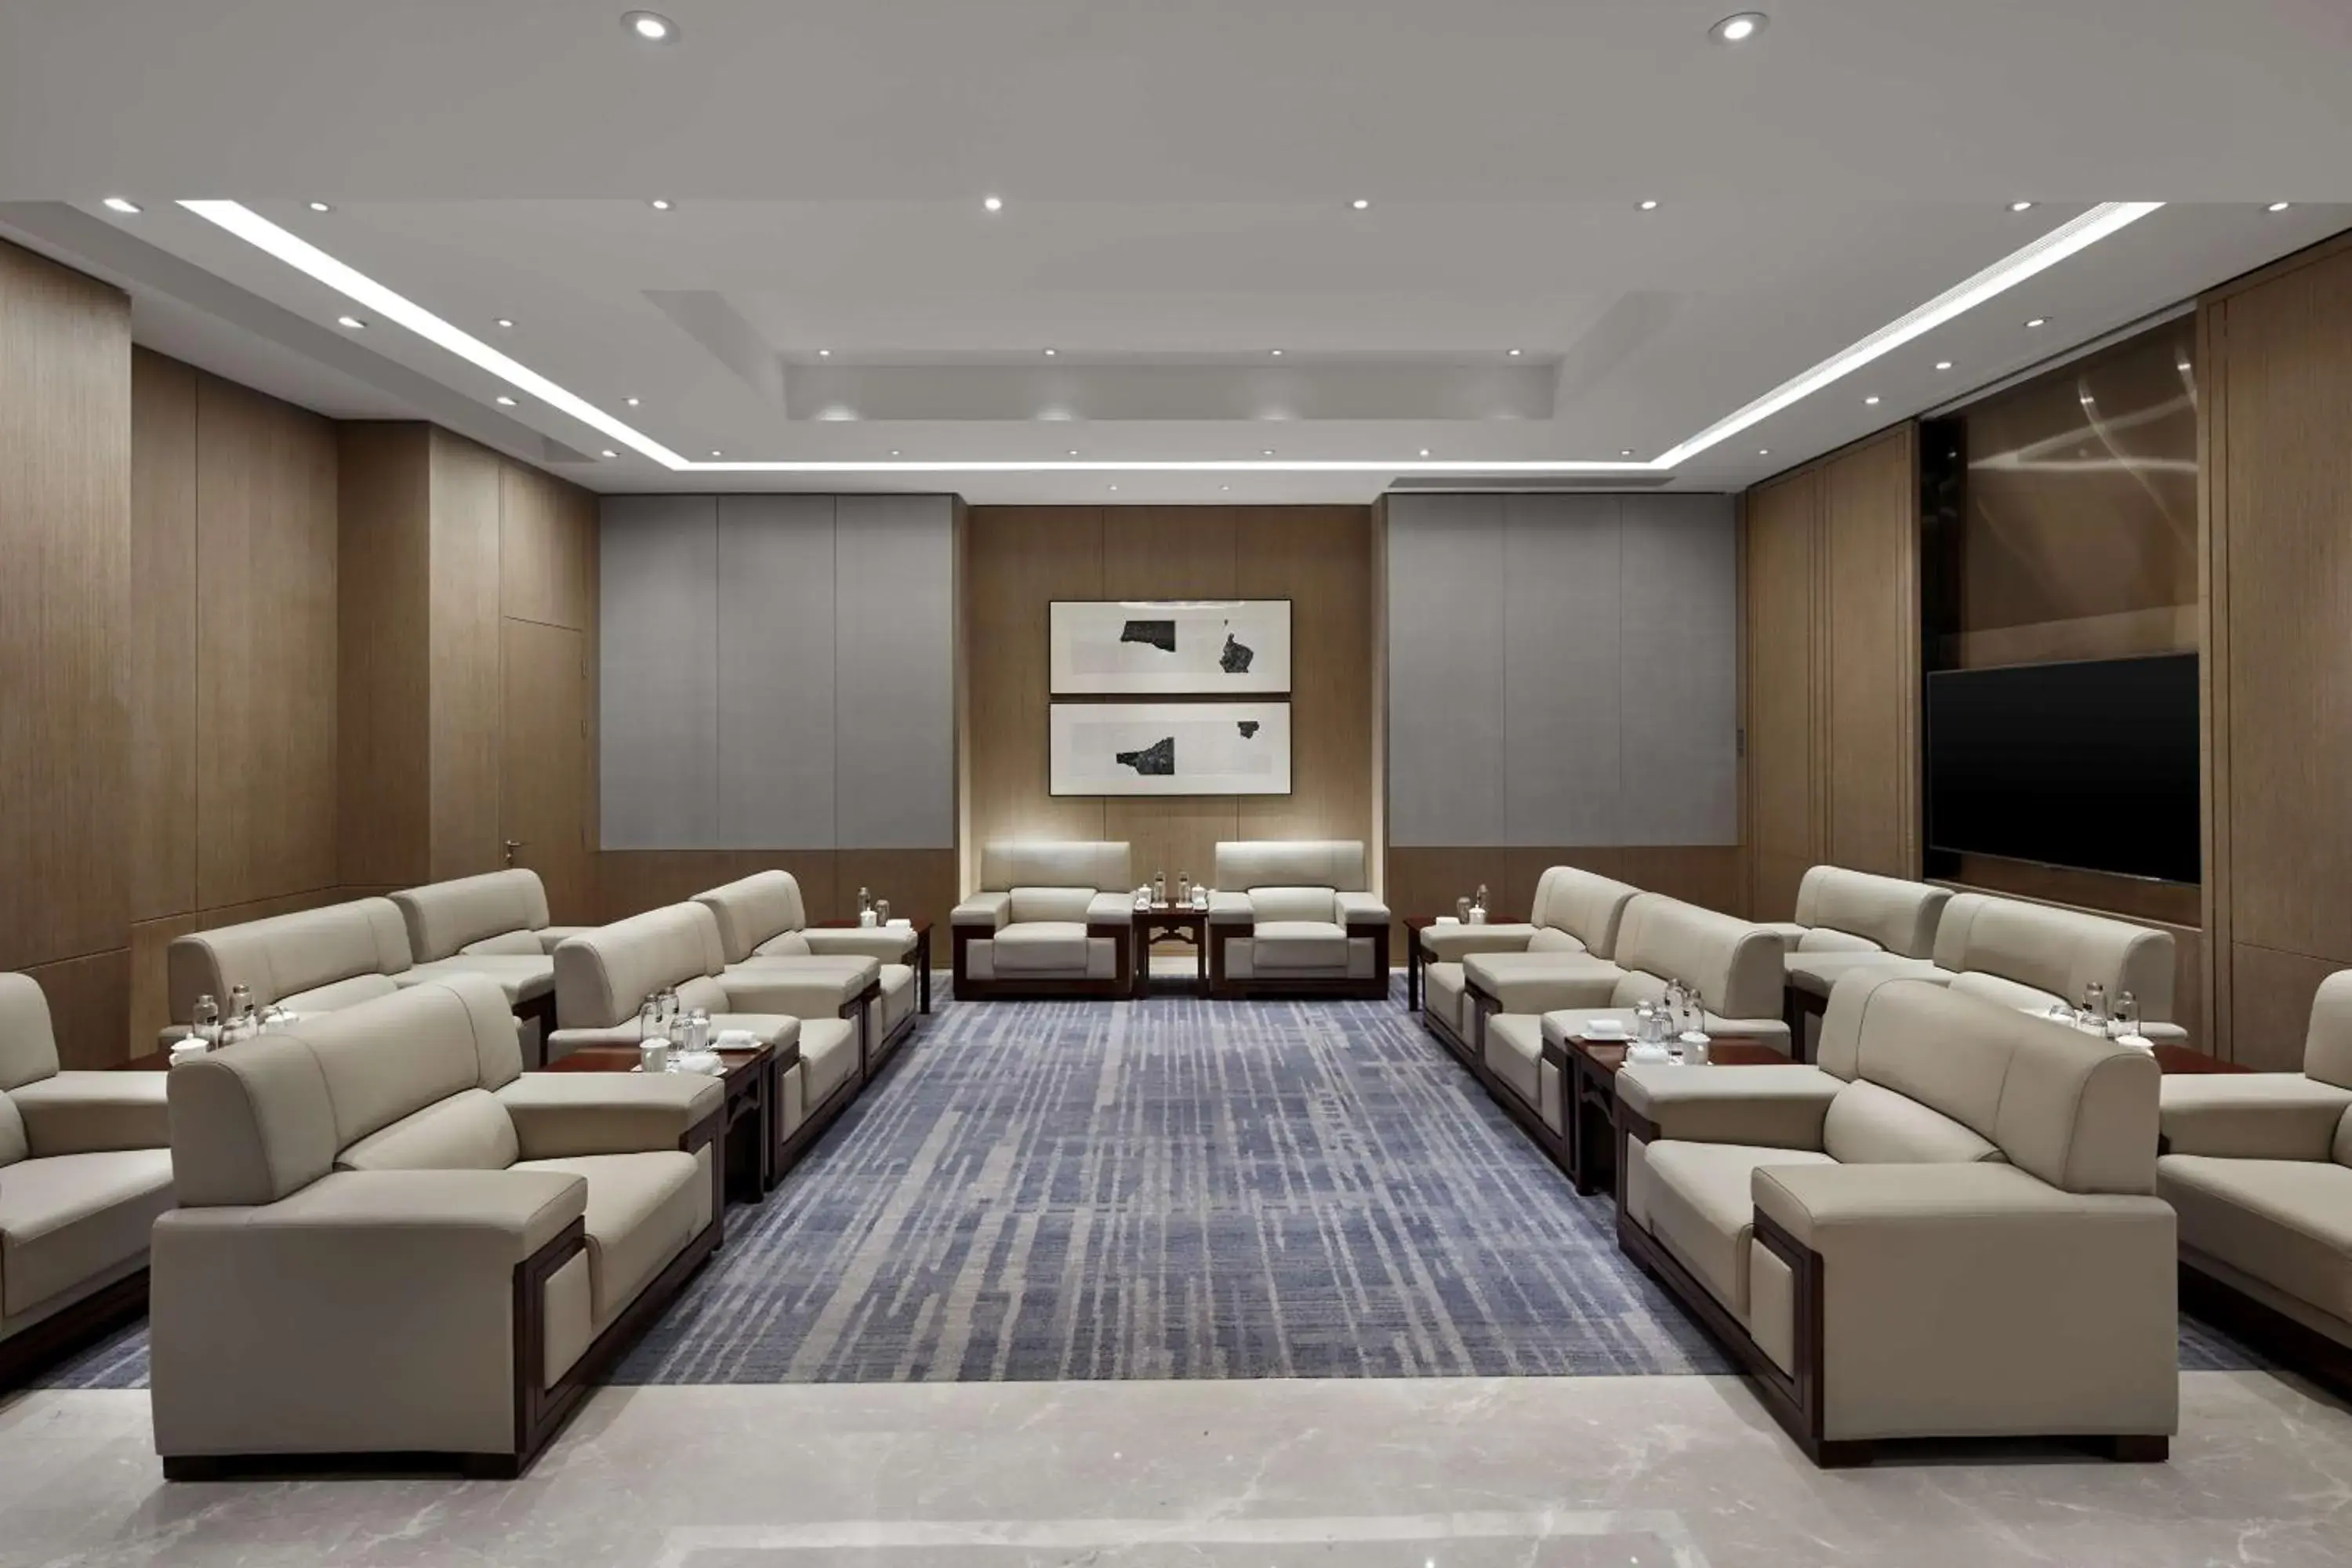 Meeting/conference room in Hilton Guiyang